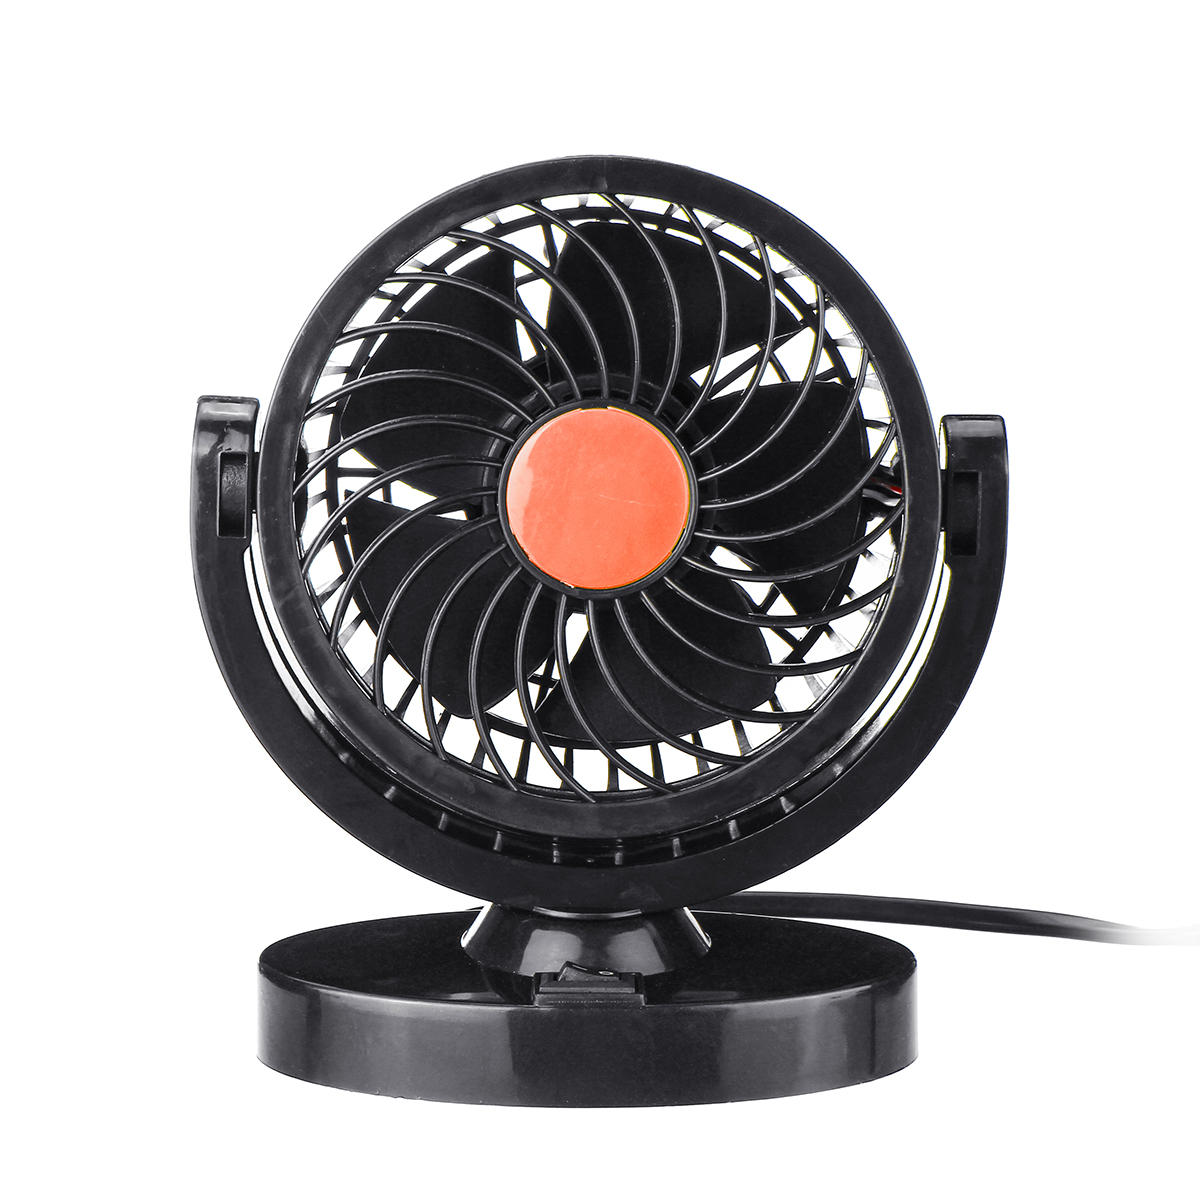 DC 12V/24V 360? All-Round Mini Auto Air Cooling Fan Adjustable Low Noise